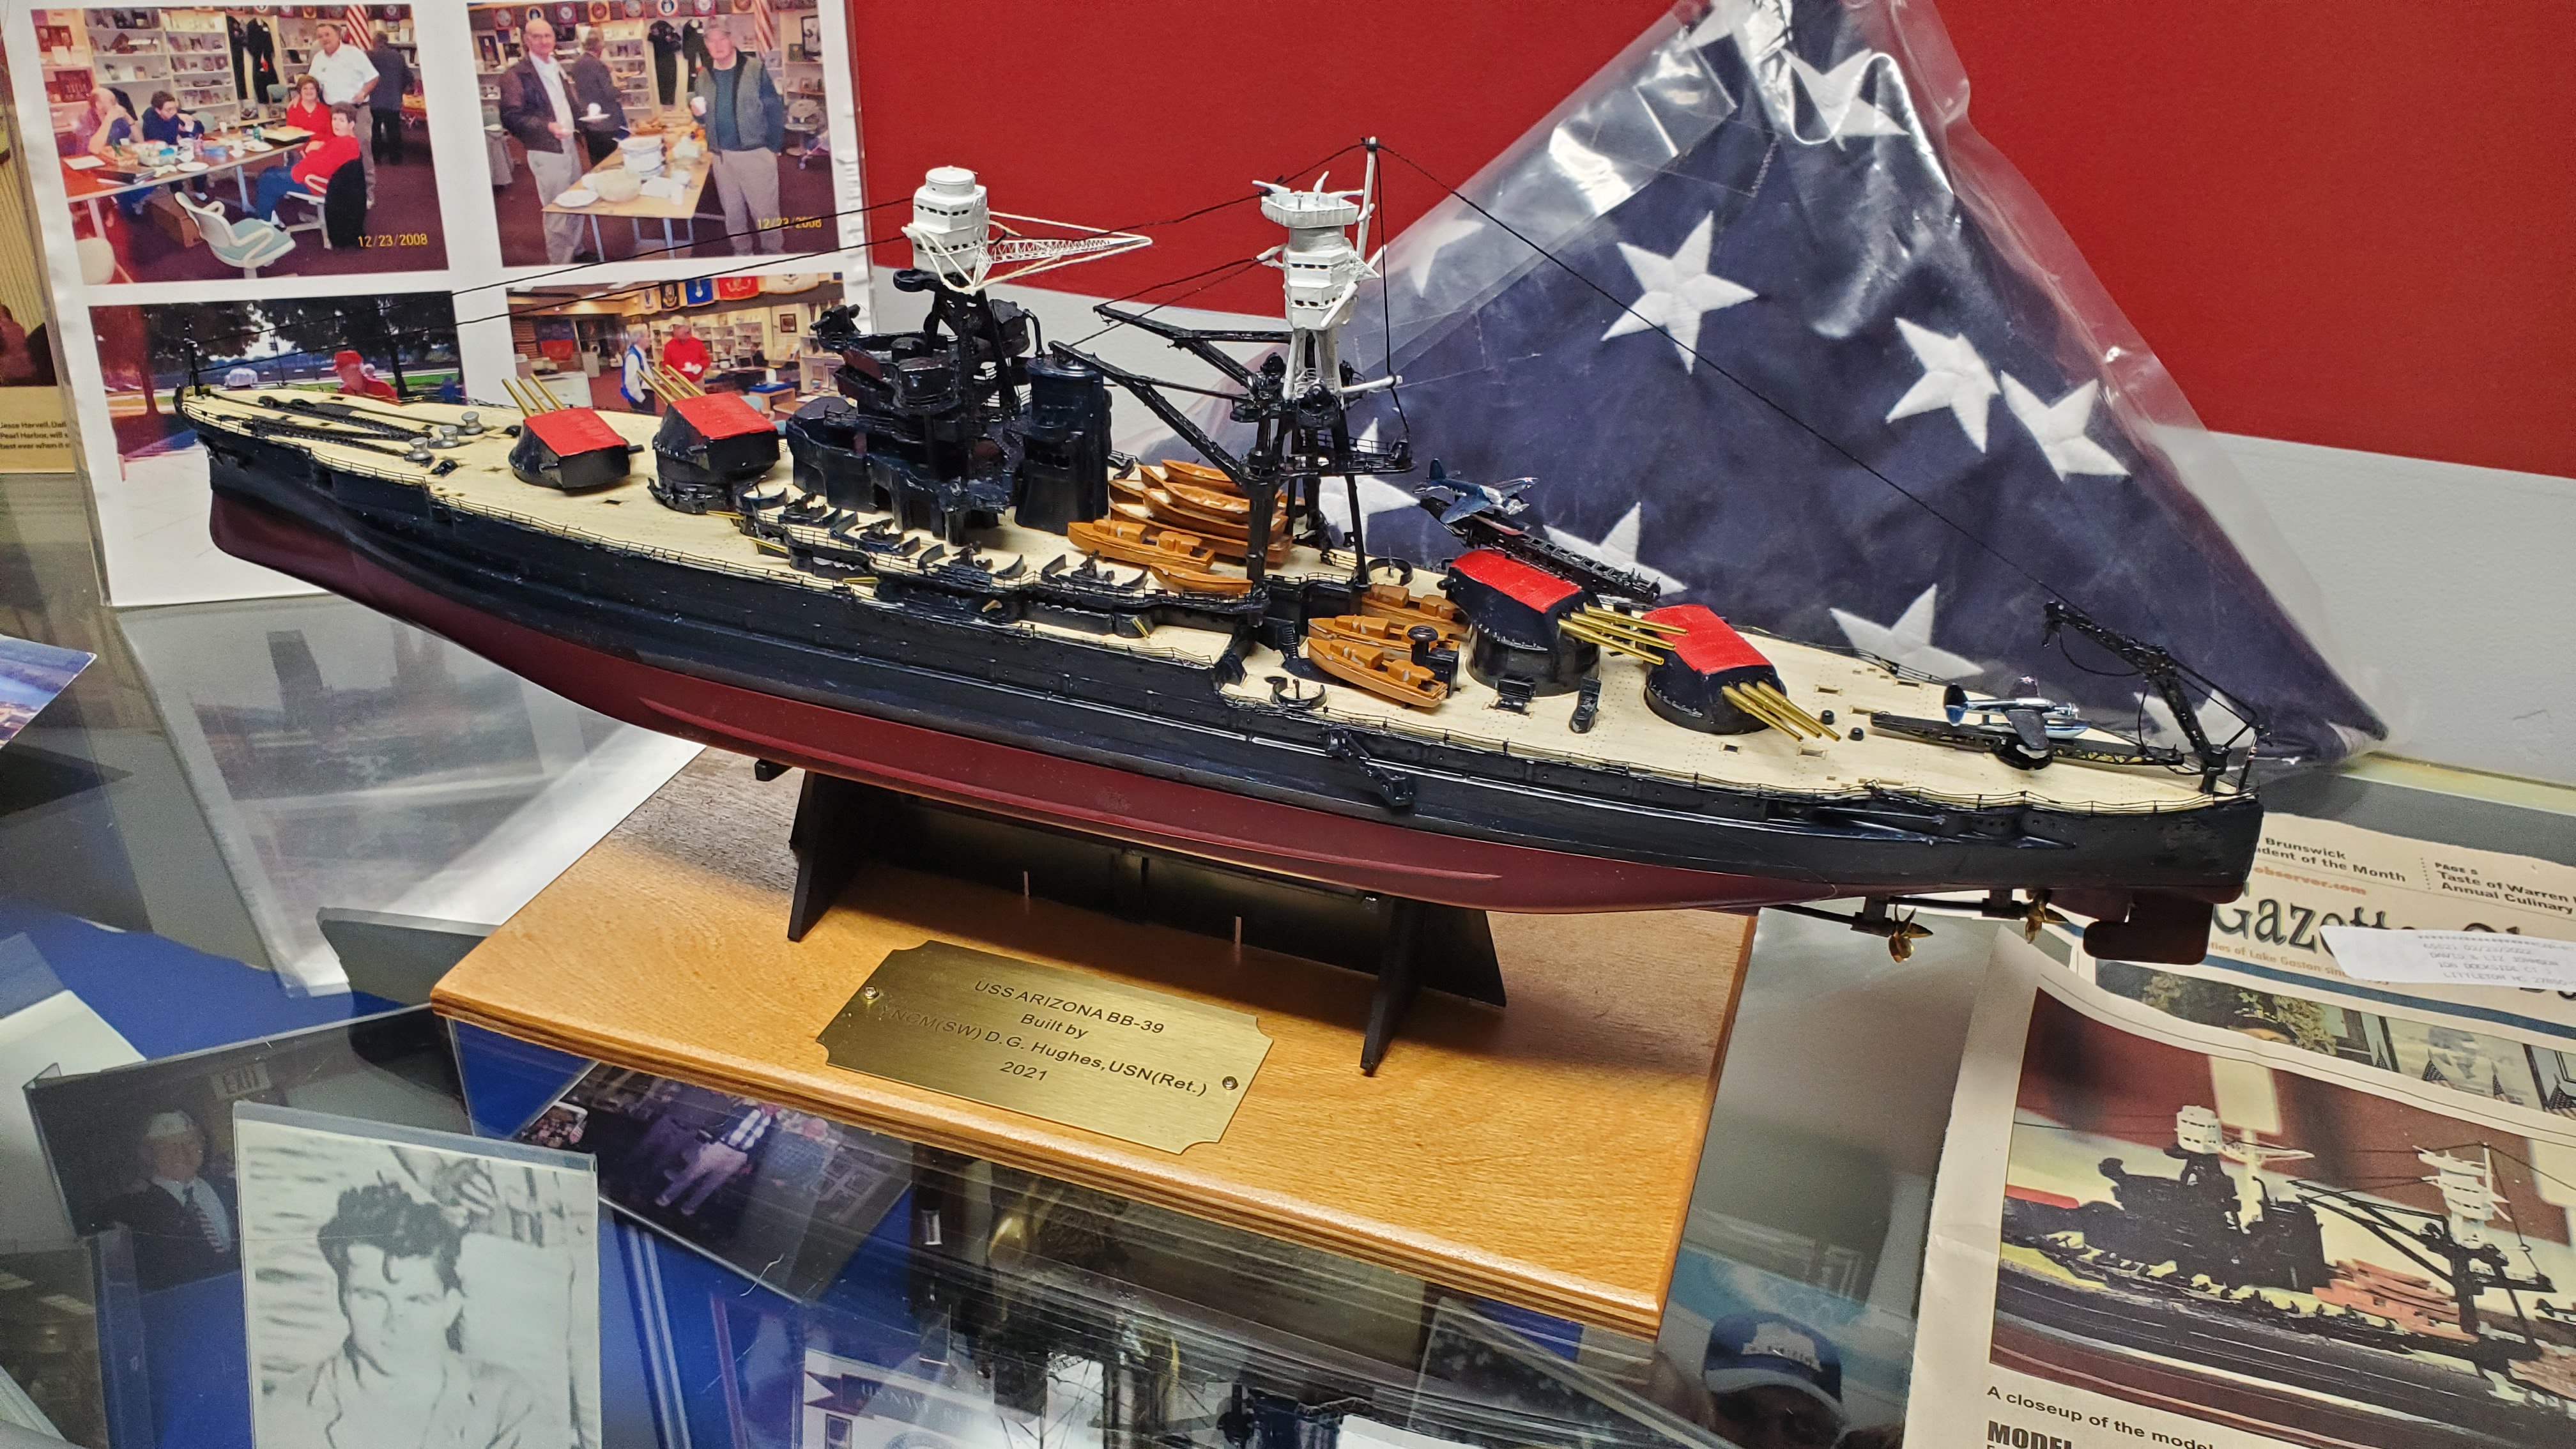 Scale model of the USS Arizona built and donated by Doug Hughes